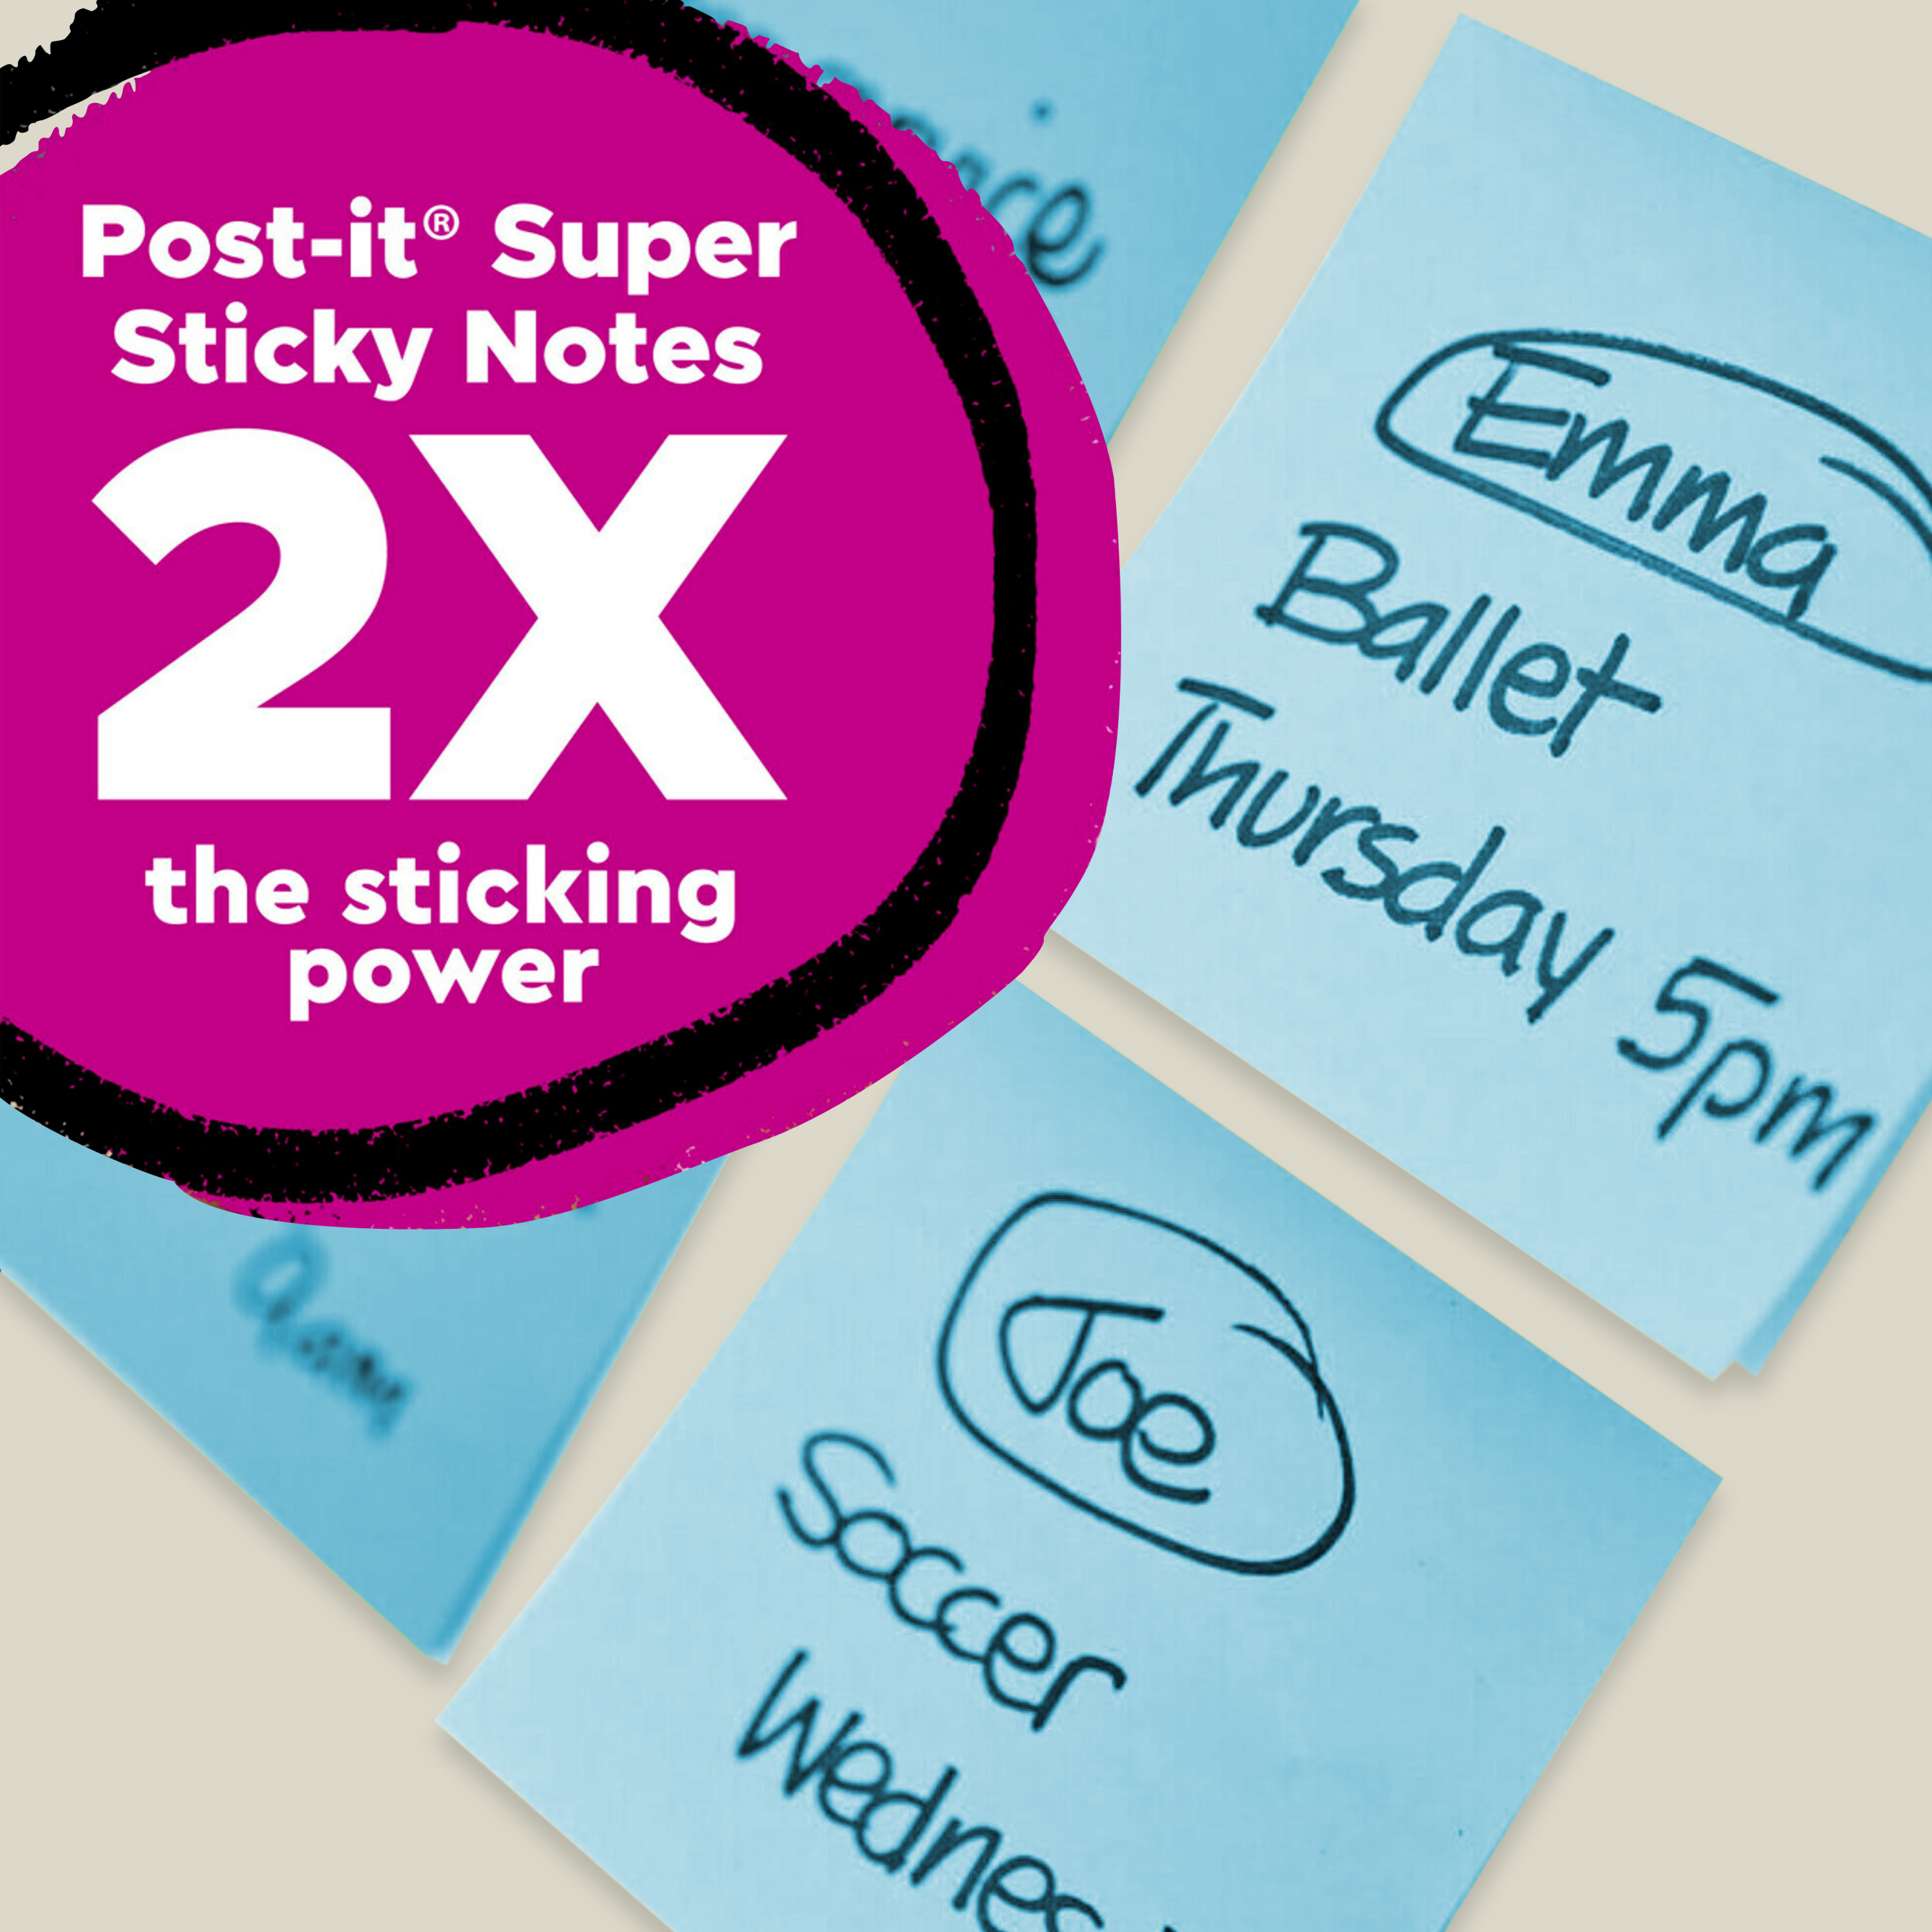 Product Number 4621R-4SST | Post-it® Super Sticky Recycled Notes 4621R-4SST